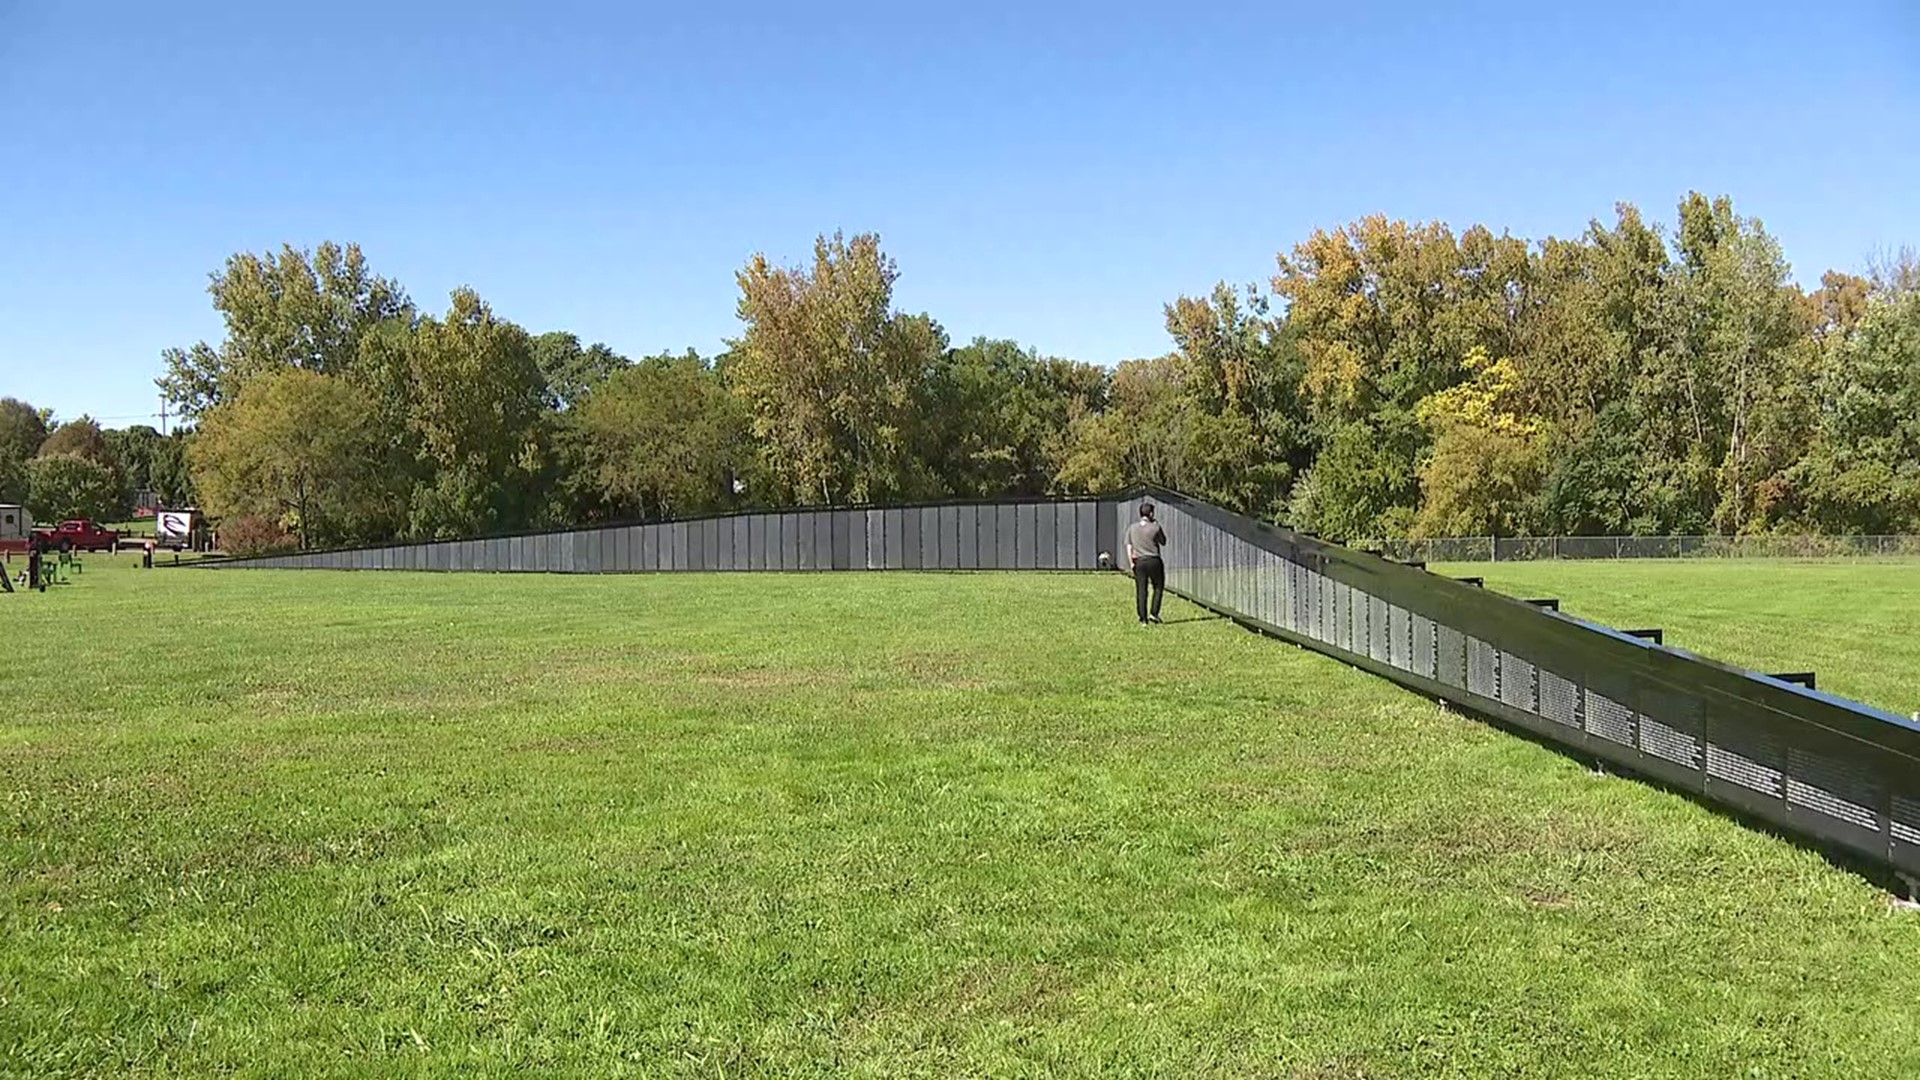 Over the next four days, a replica of the Vietnam Veterans Memorial will be on display in Sayre.